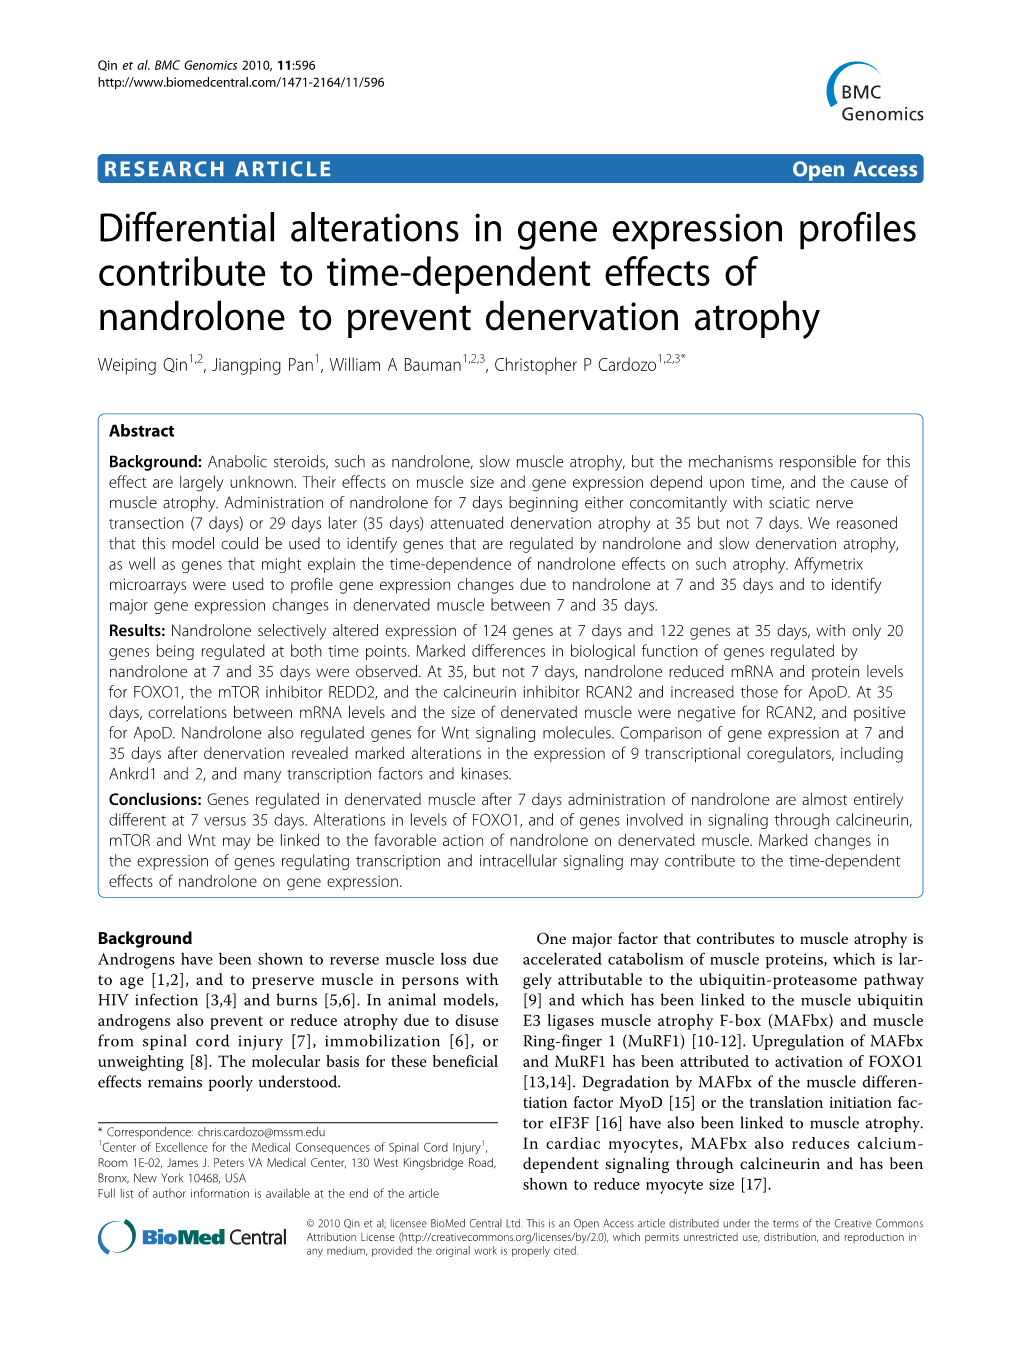 Differential Alterations in Gene Expression Profiles Contribute To